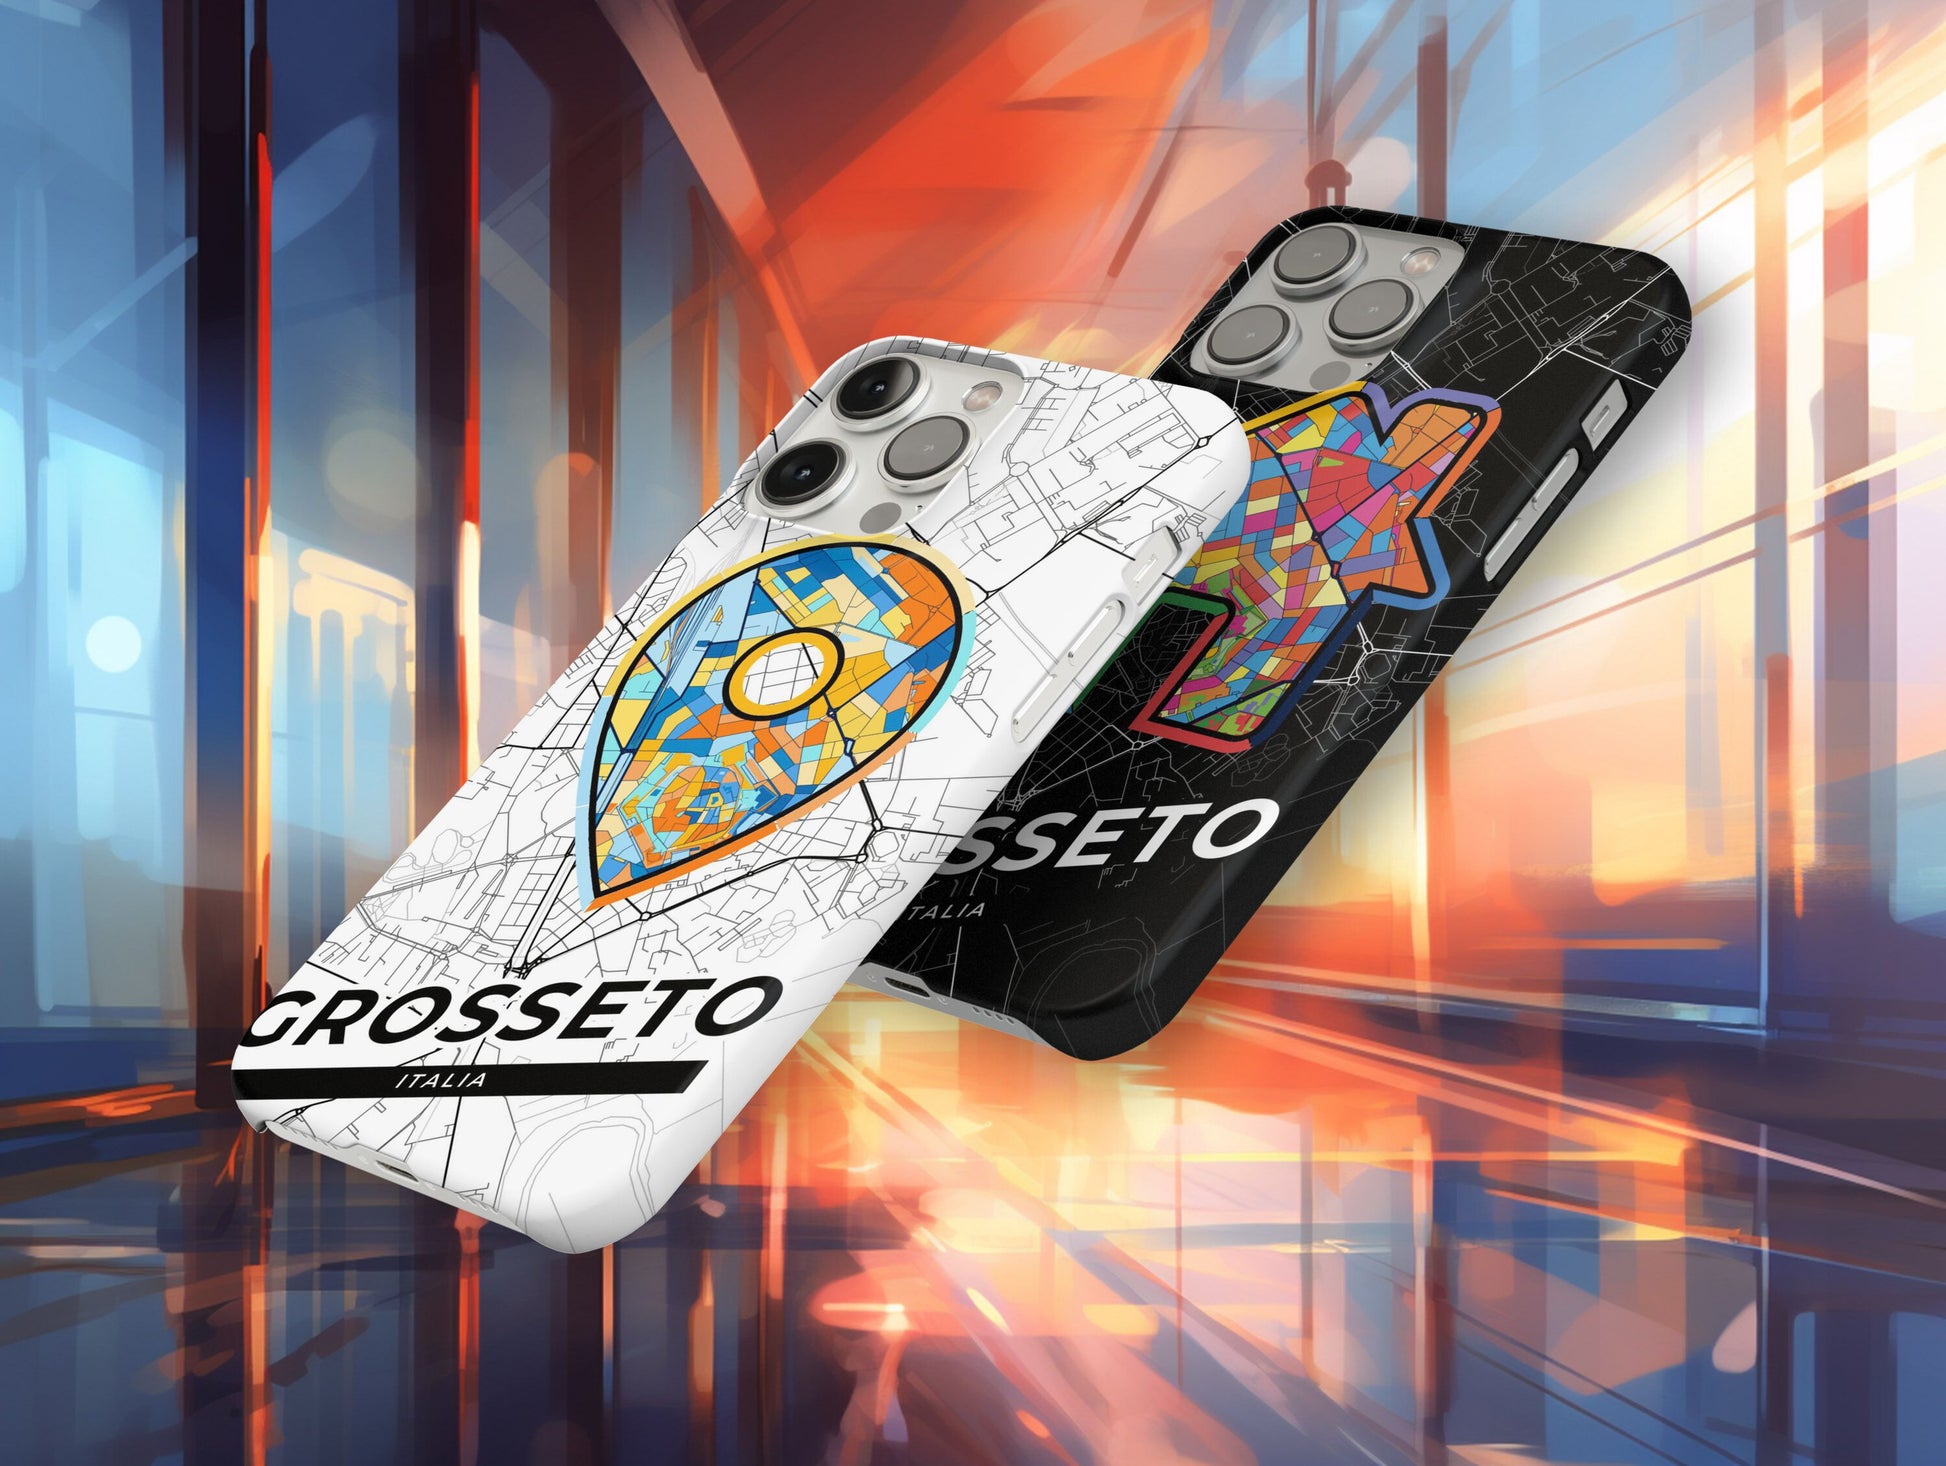 Grosseto Italy slim phone case with colorful icon. Birthday, wedding or housewarming gift. Couple match cases.